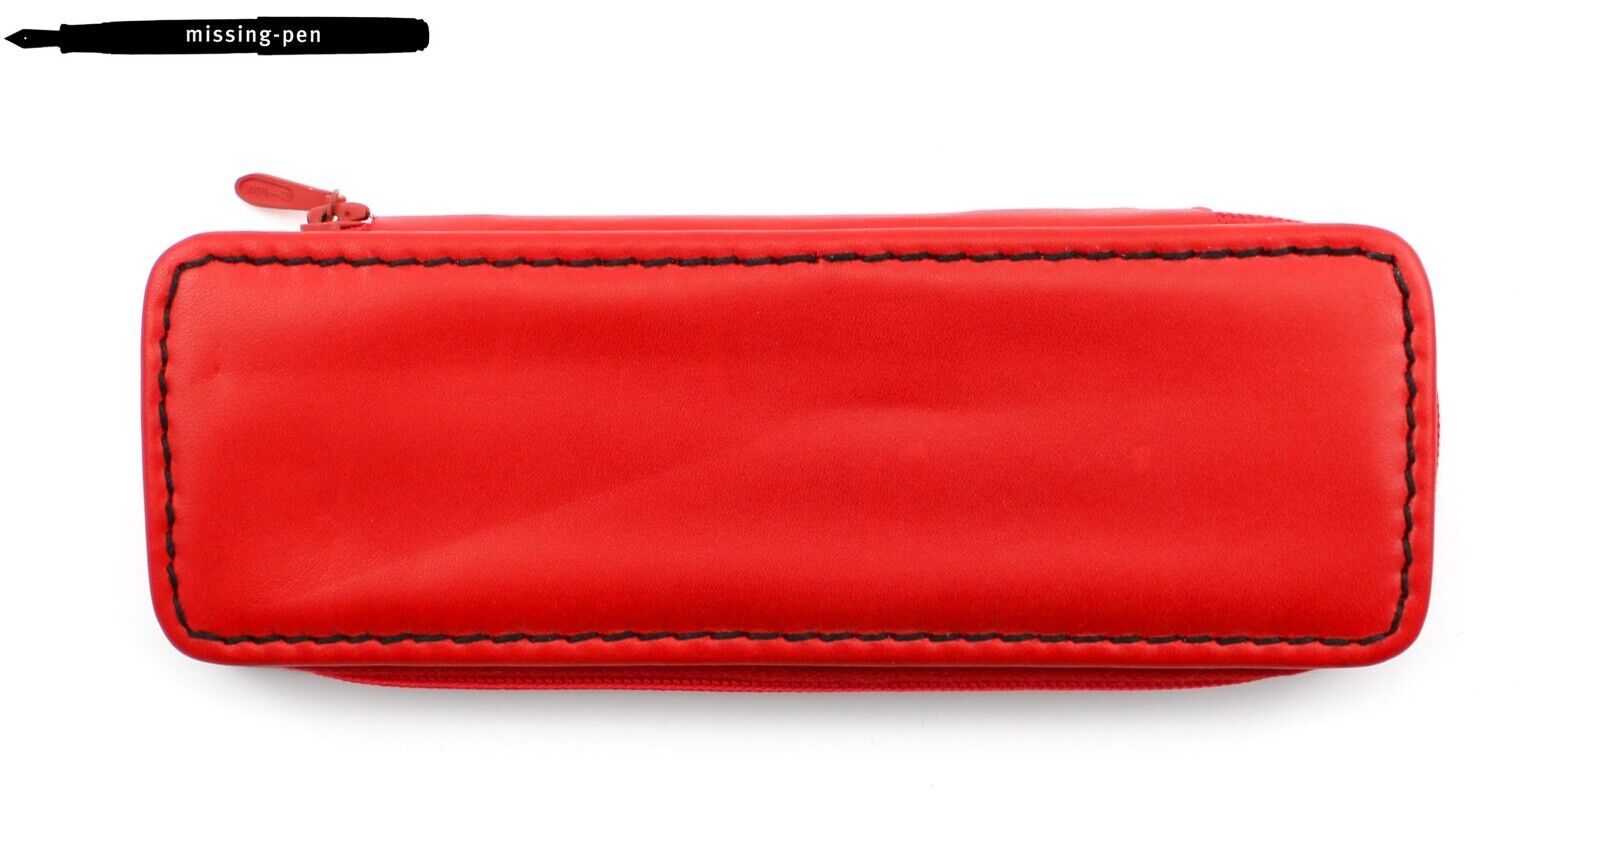 Kübler Genuine Zipper Leather Case / Etui in Red for 3 Pens / Made in Germany